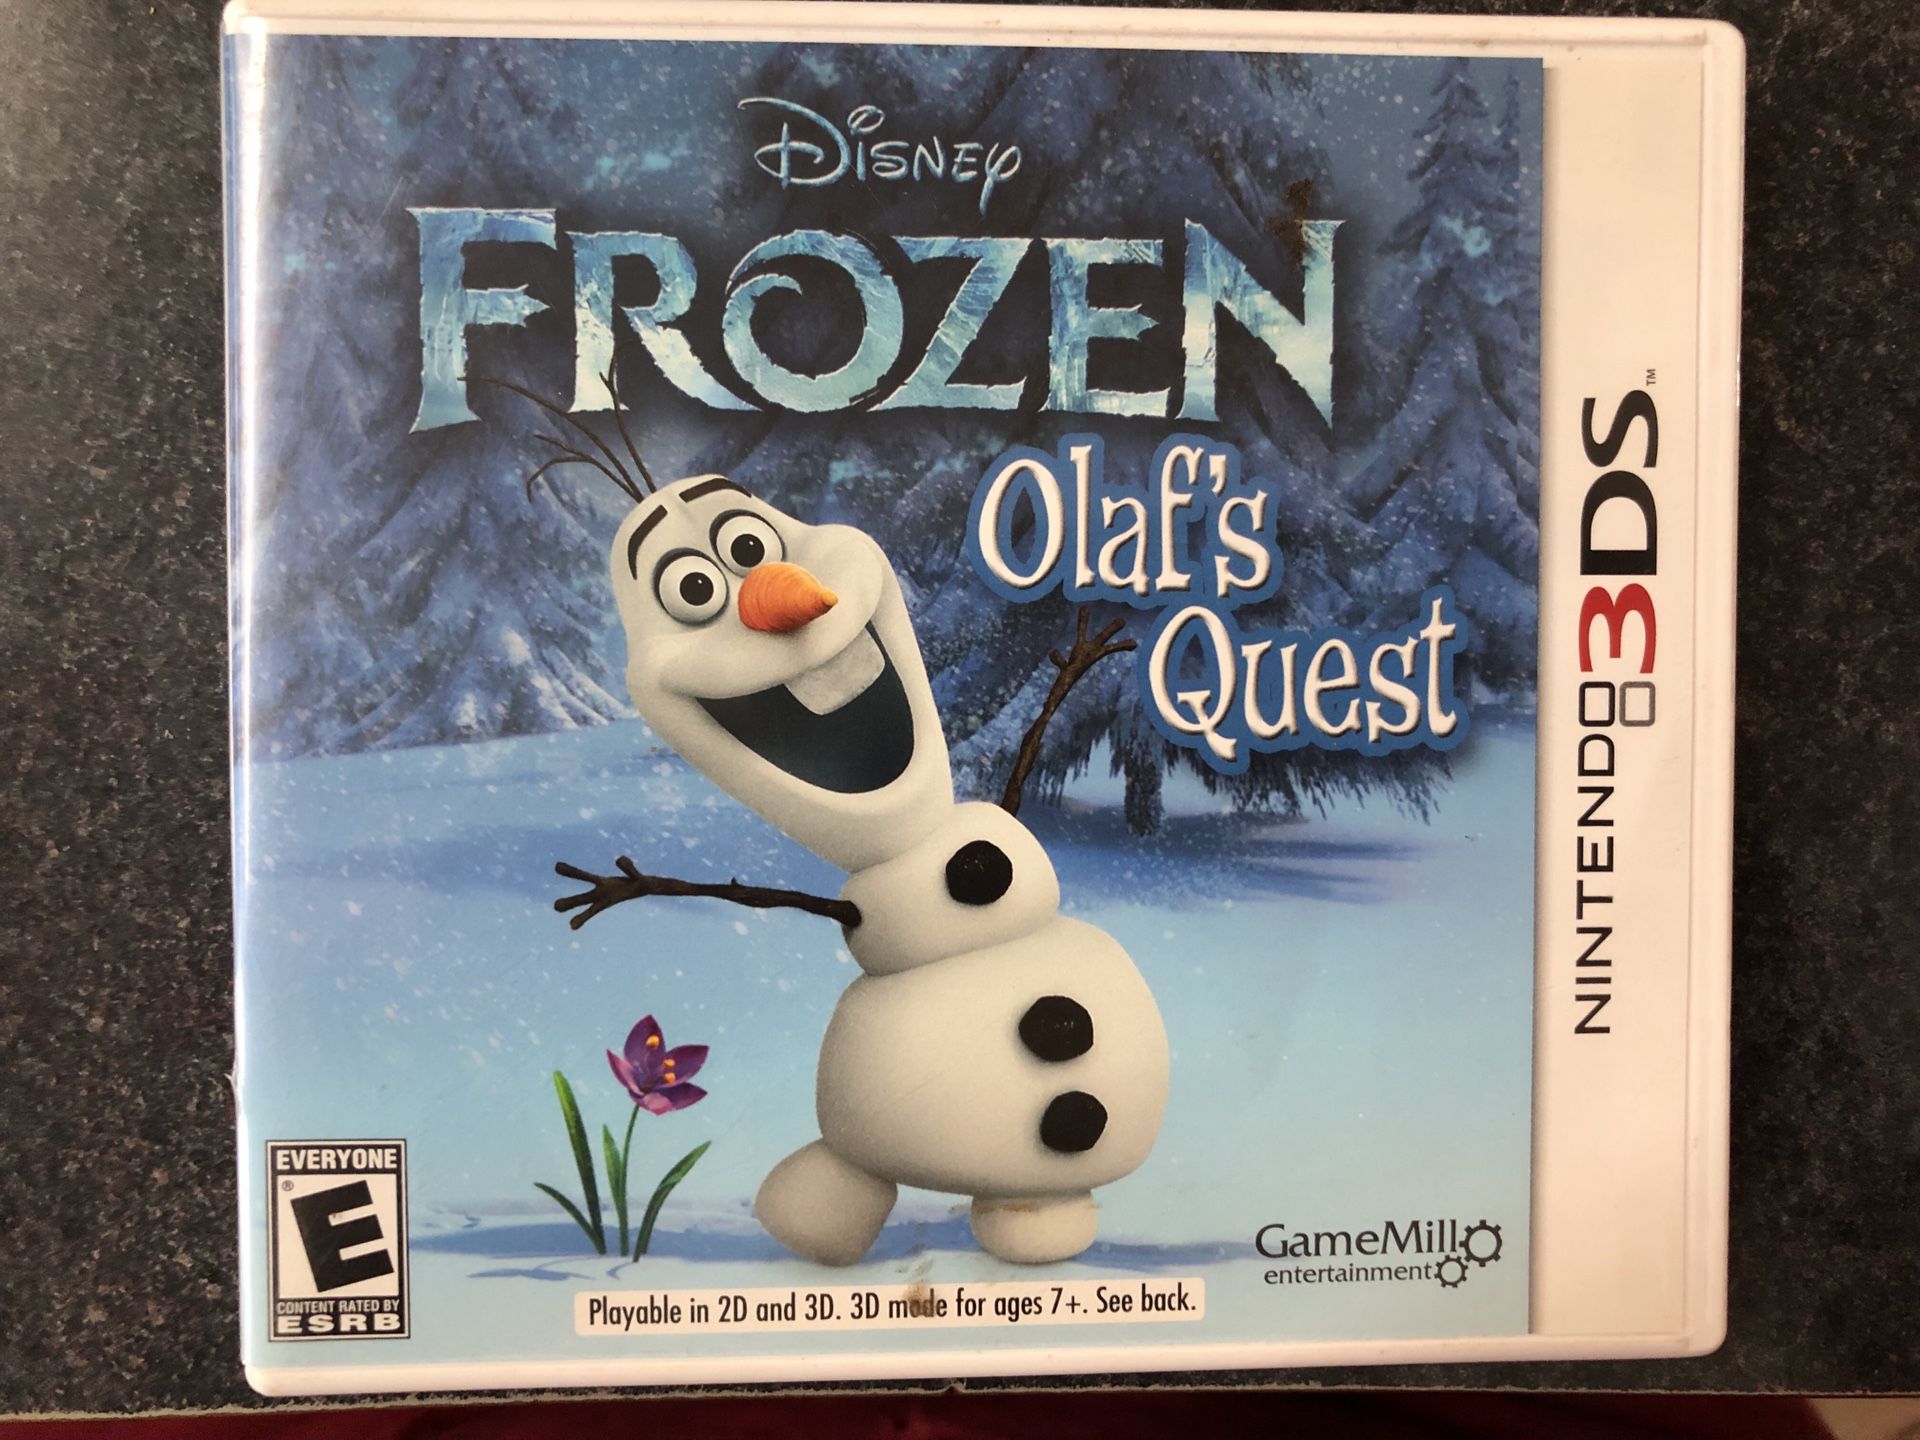 Disney Frozen Olaf’s Quest game for Nintendo 3Ds